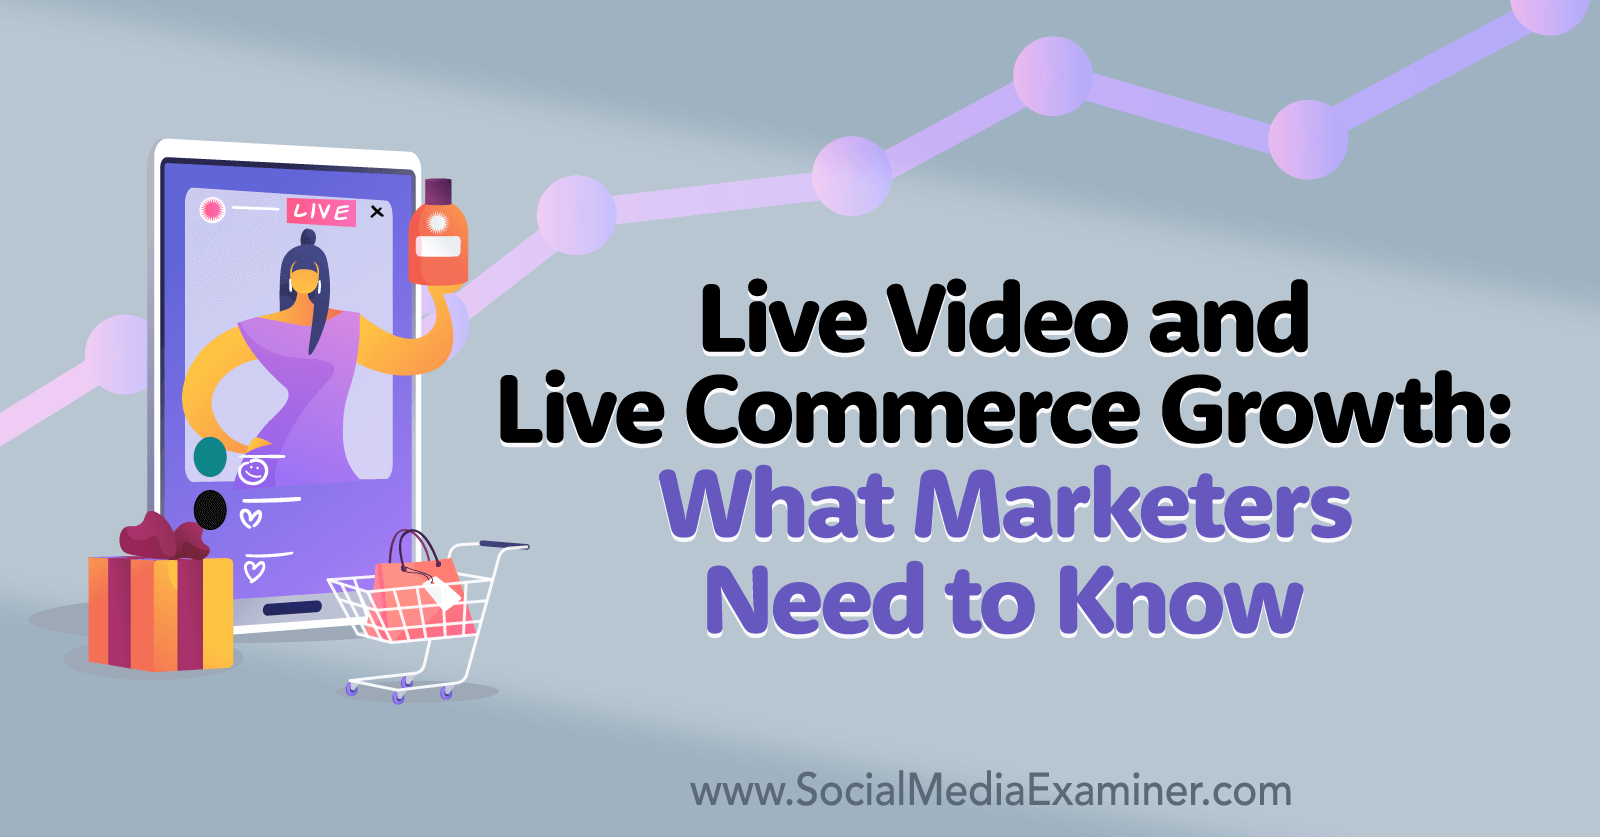 Live Video and Live Commerce Growth: What Marketers Need to Know by Michael Stelzner